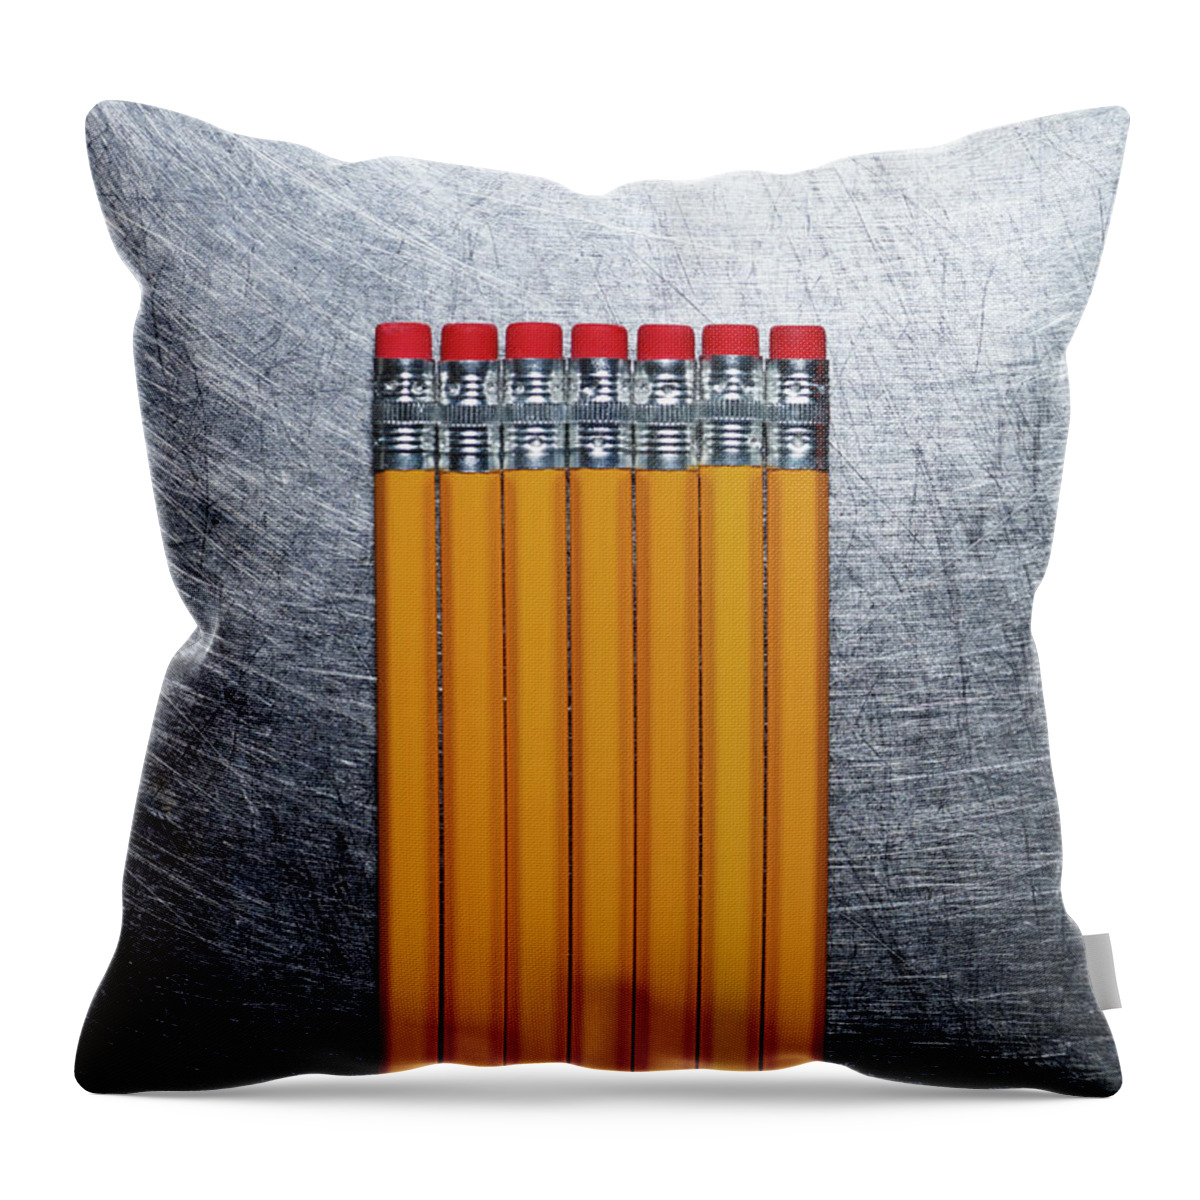 Education Throw Pillow featuring the photograph Yellow Pencils With Erasers On by Ballyscanlon